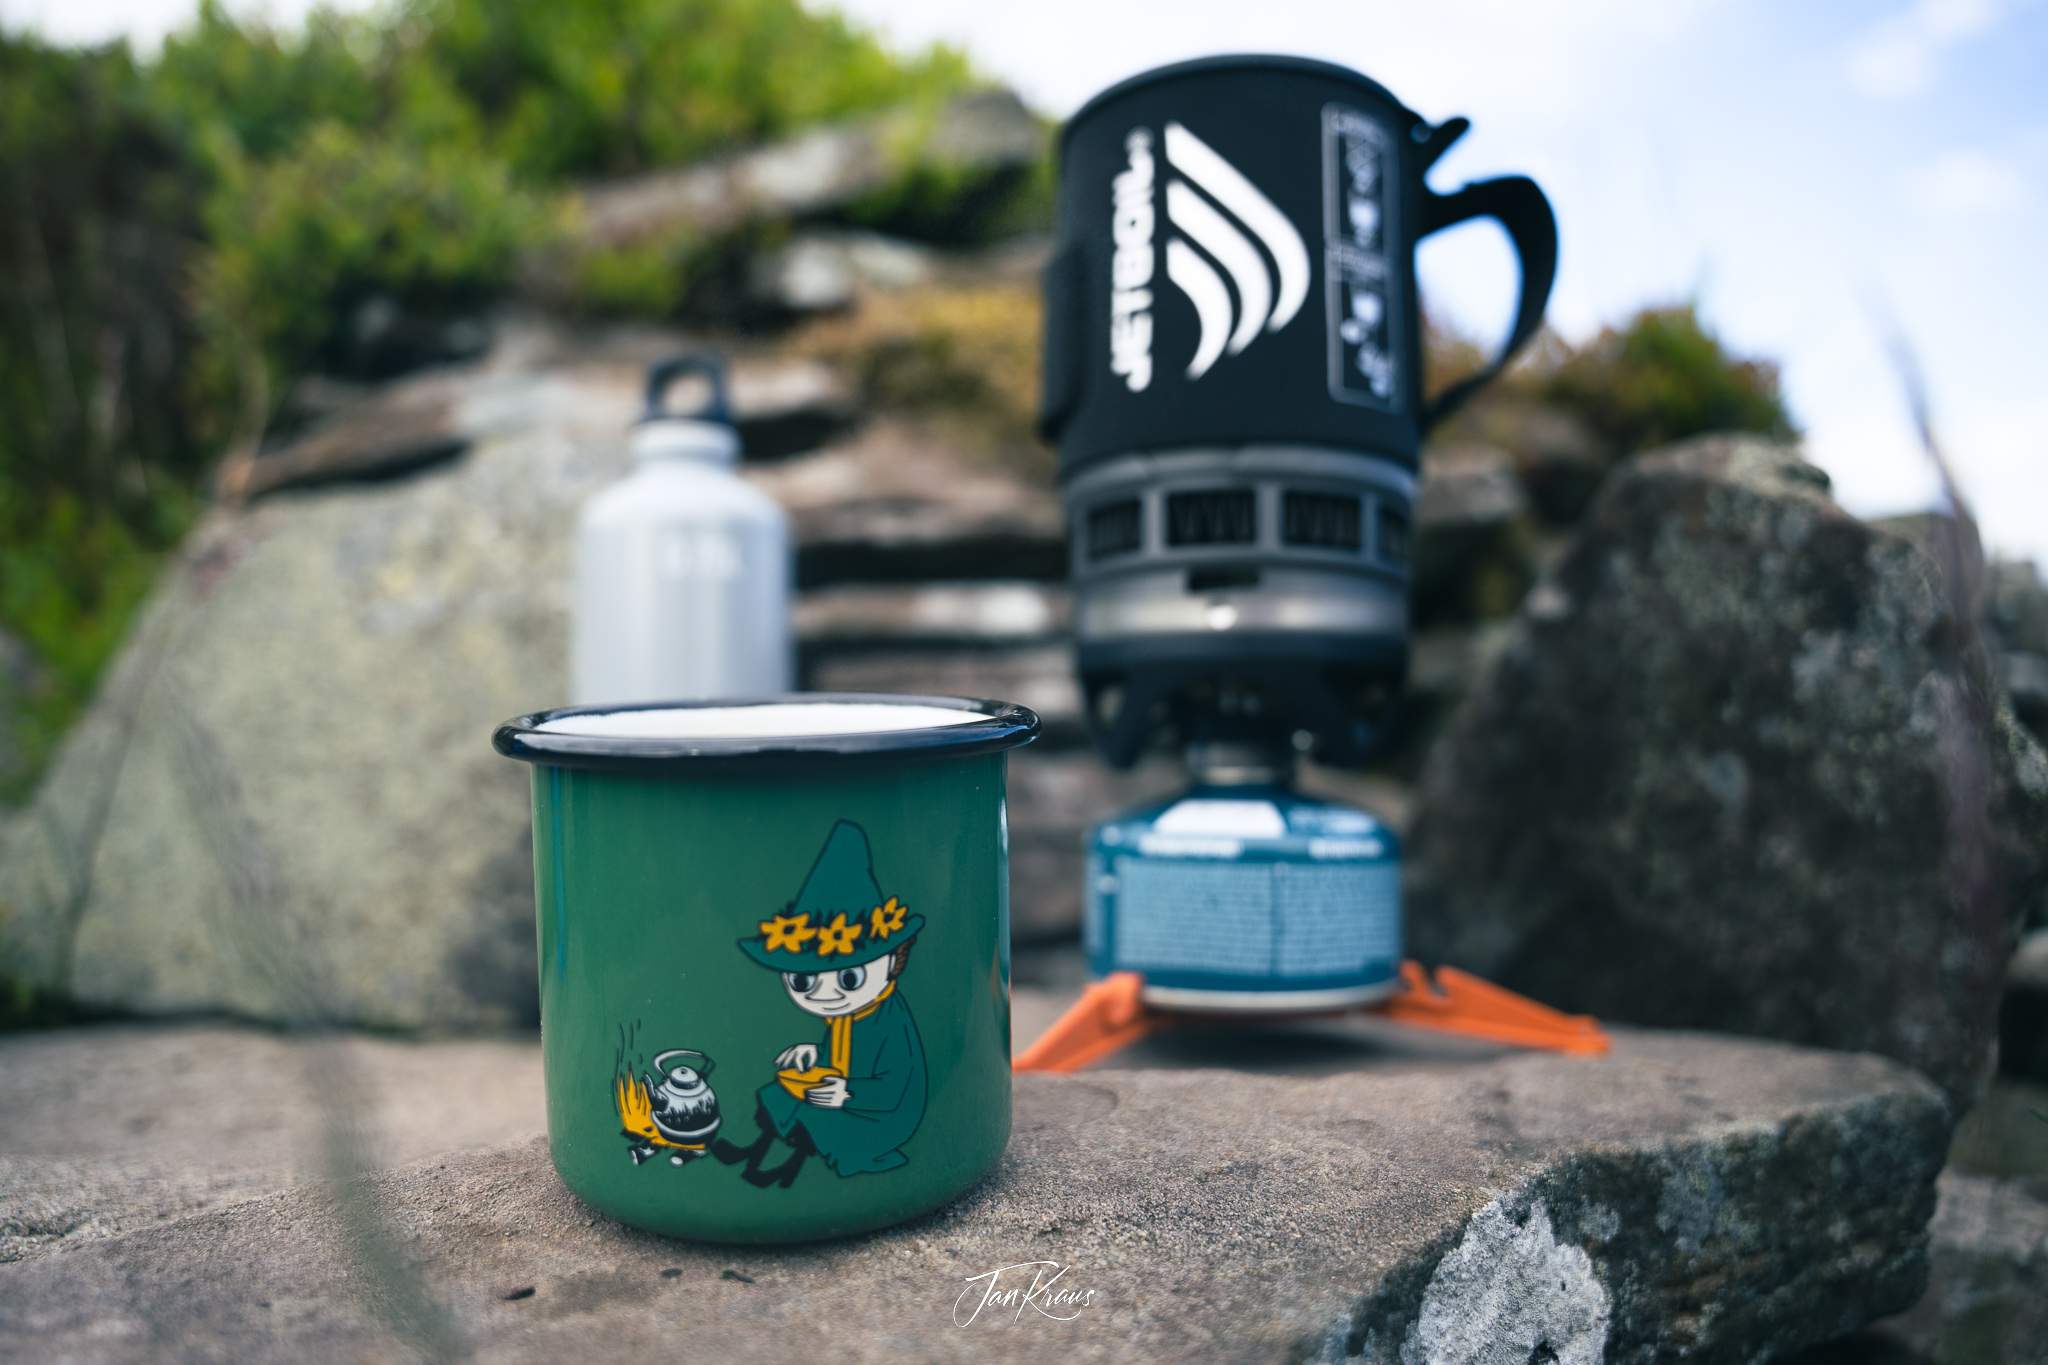 Getting my coffee - If Snufkin was wandering these days, he would use JetBoil, photo at The Beacons Way, Wales, UK